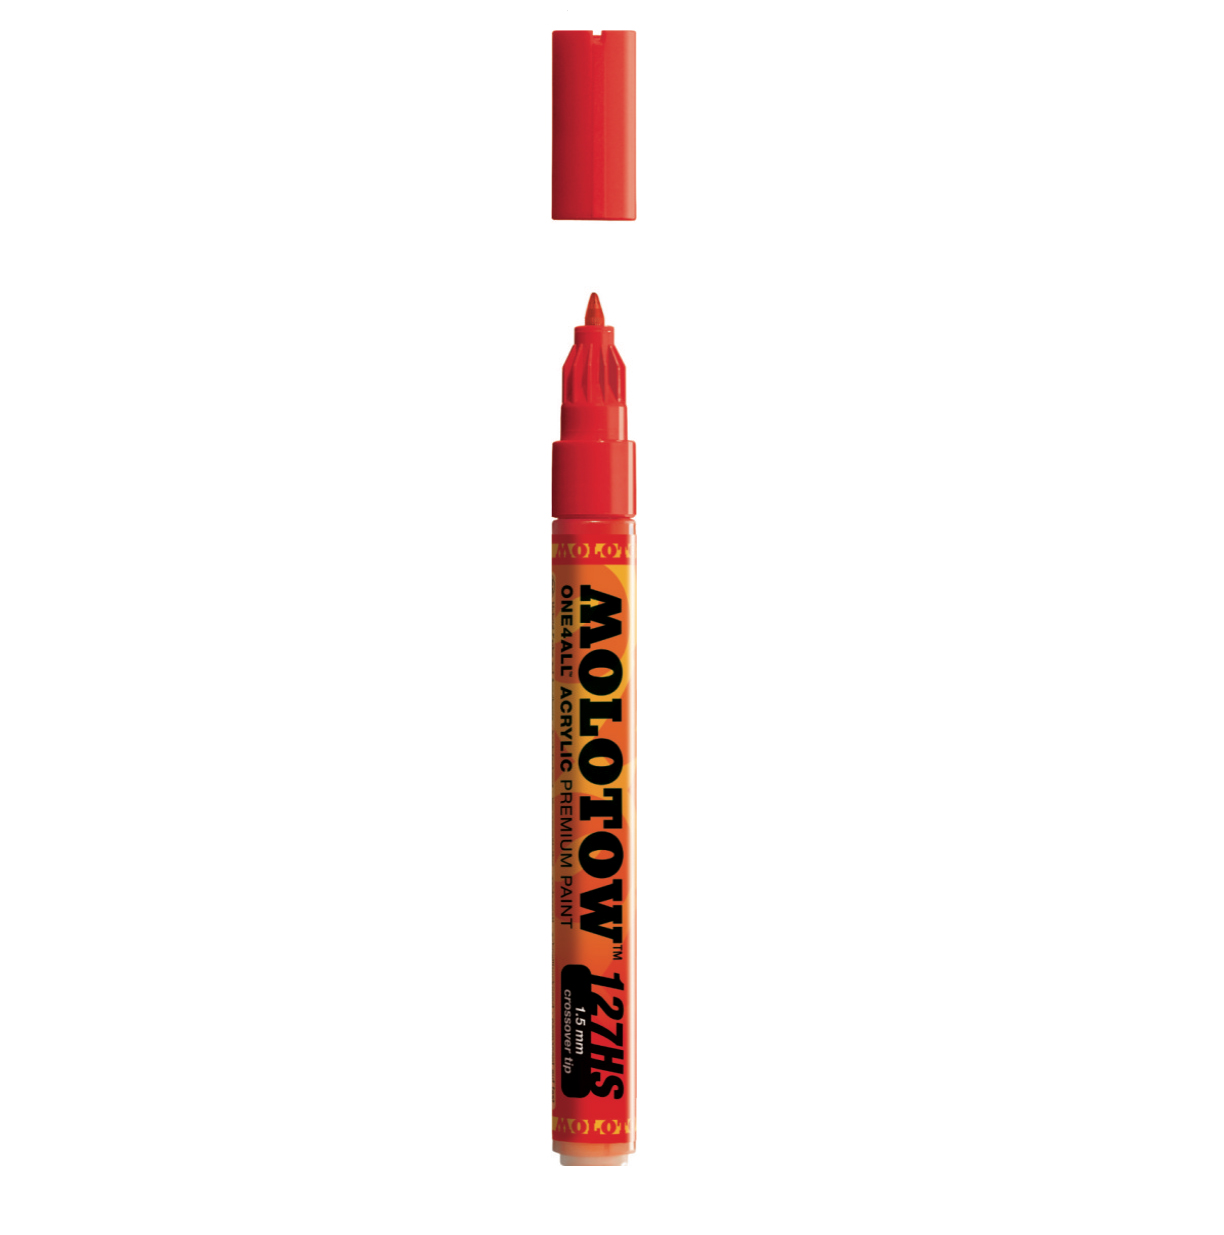 Molotow Co Tip 1.5Mm Traffic Red Paint Marker